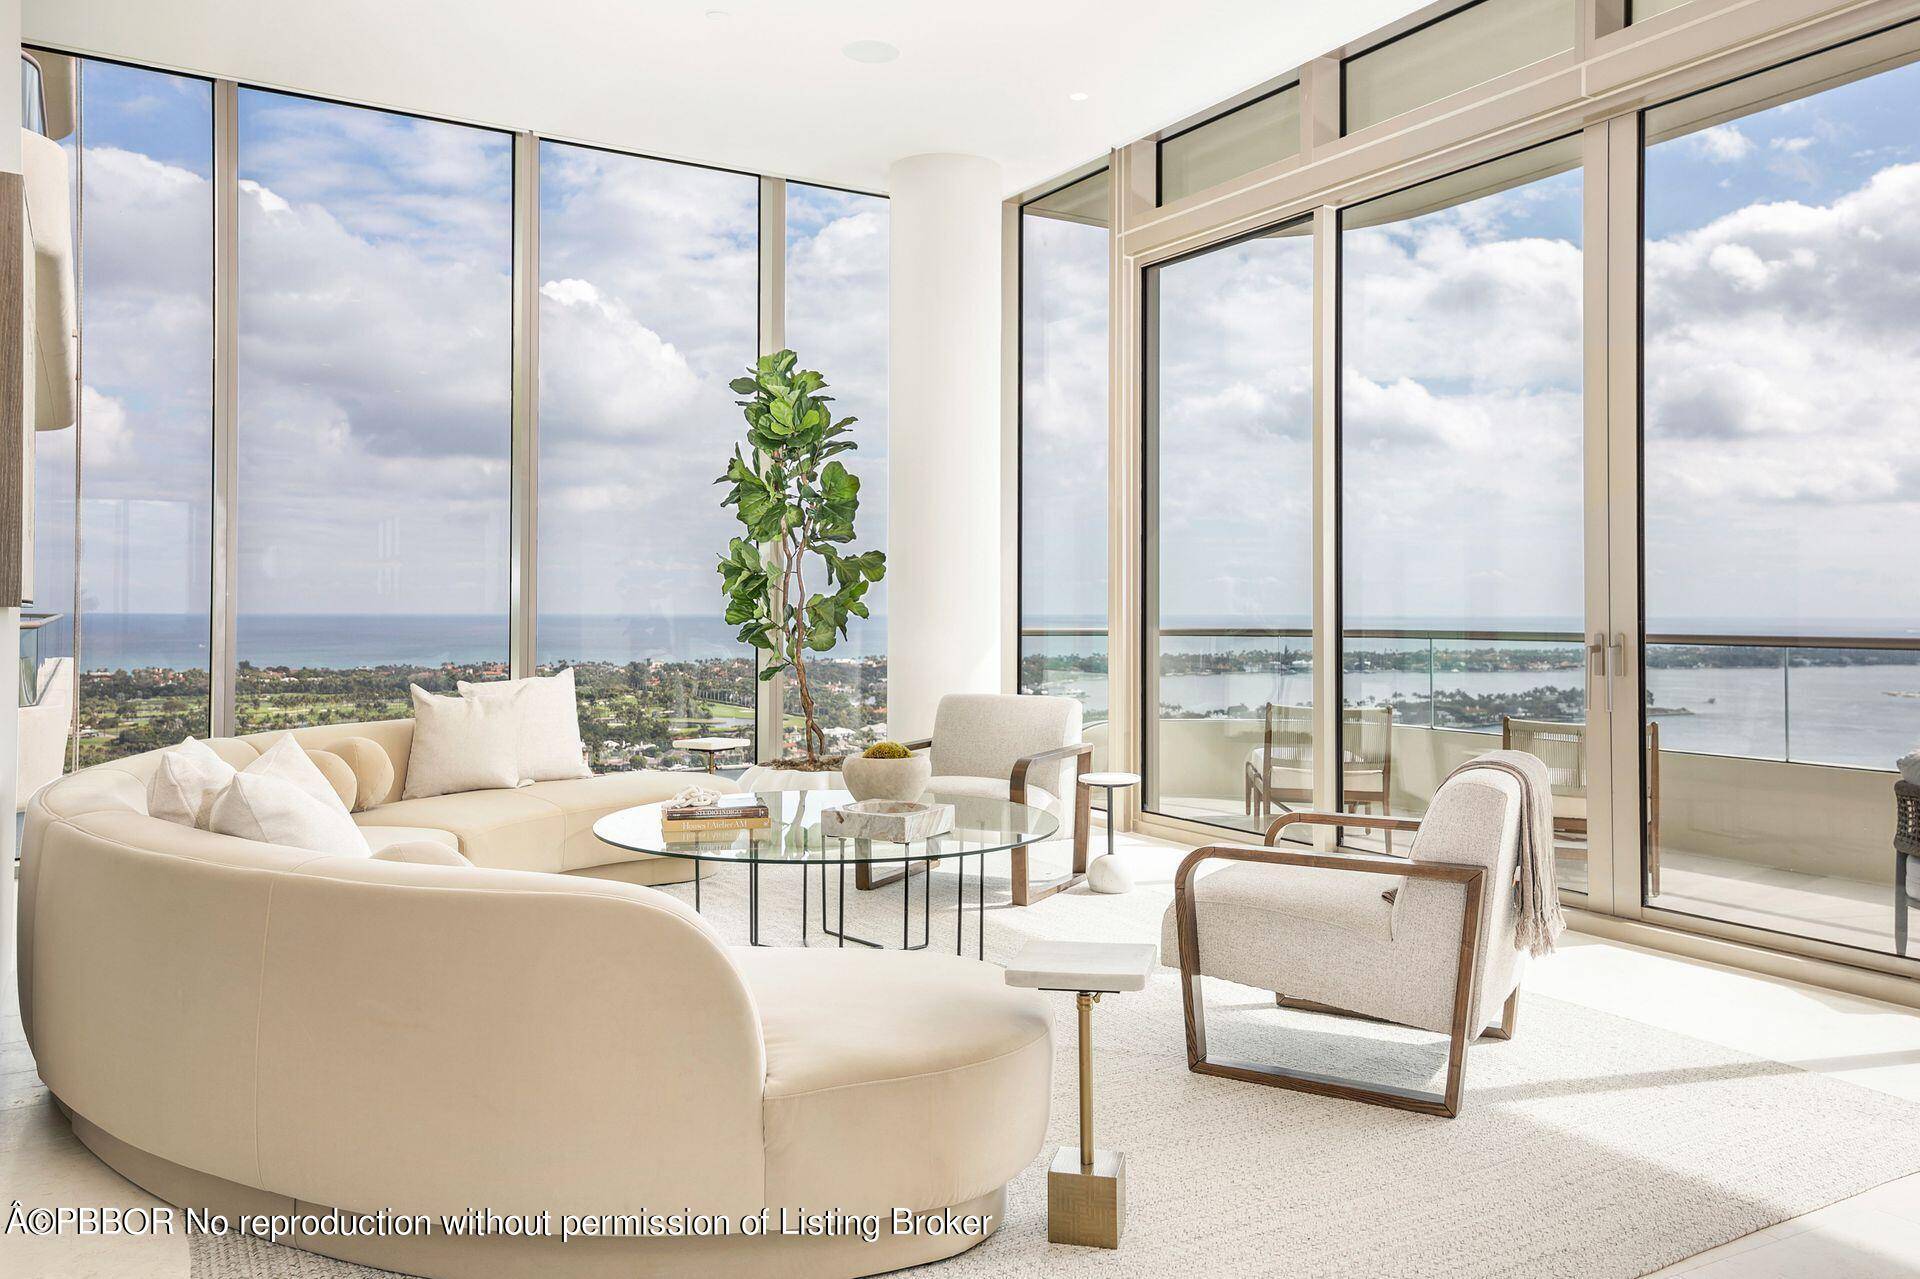 Brand New Construction Penthouse G is now available for immediate occupancy at La Clara, the newest luxury building on the West Palm Beach waterfront.